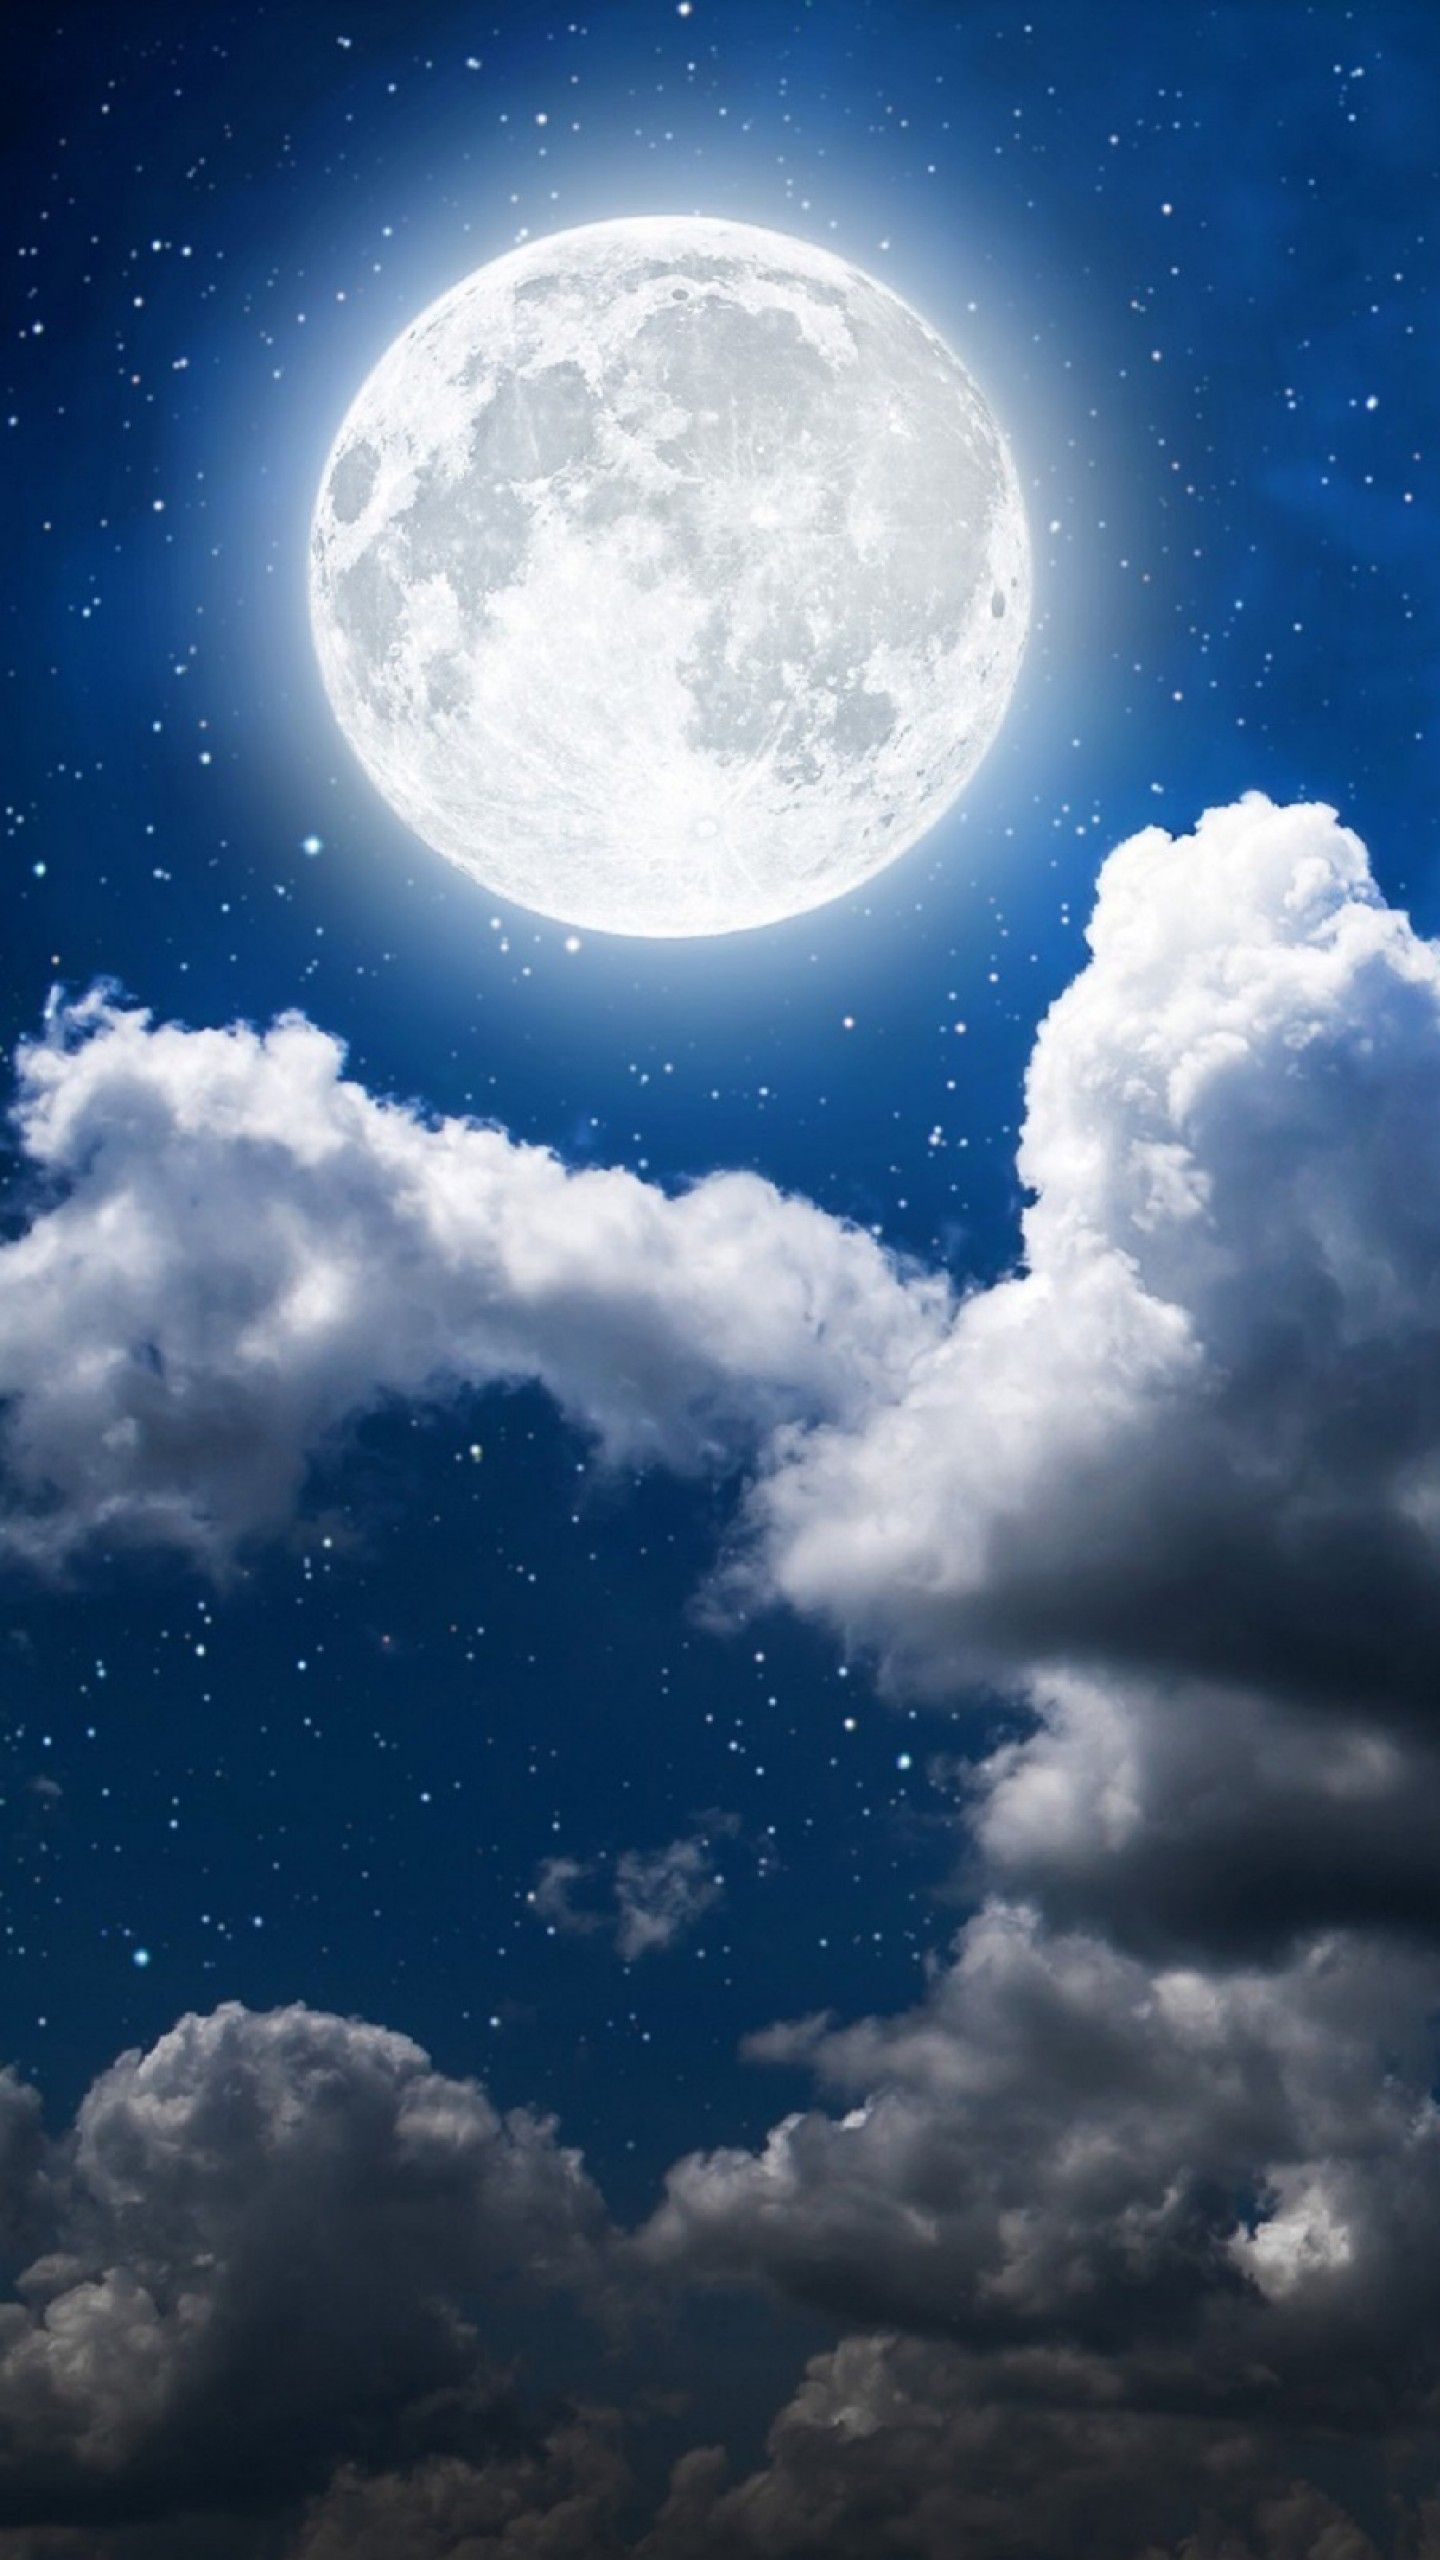 Clouds With Moon